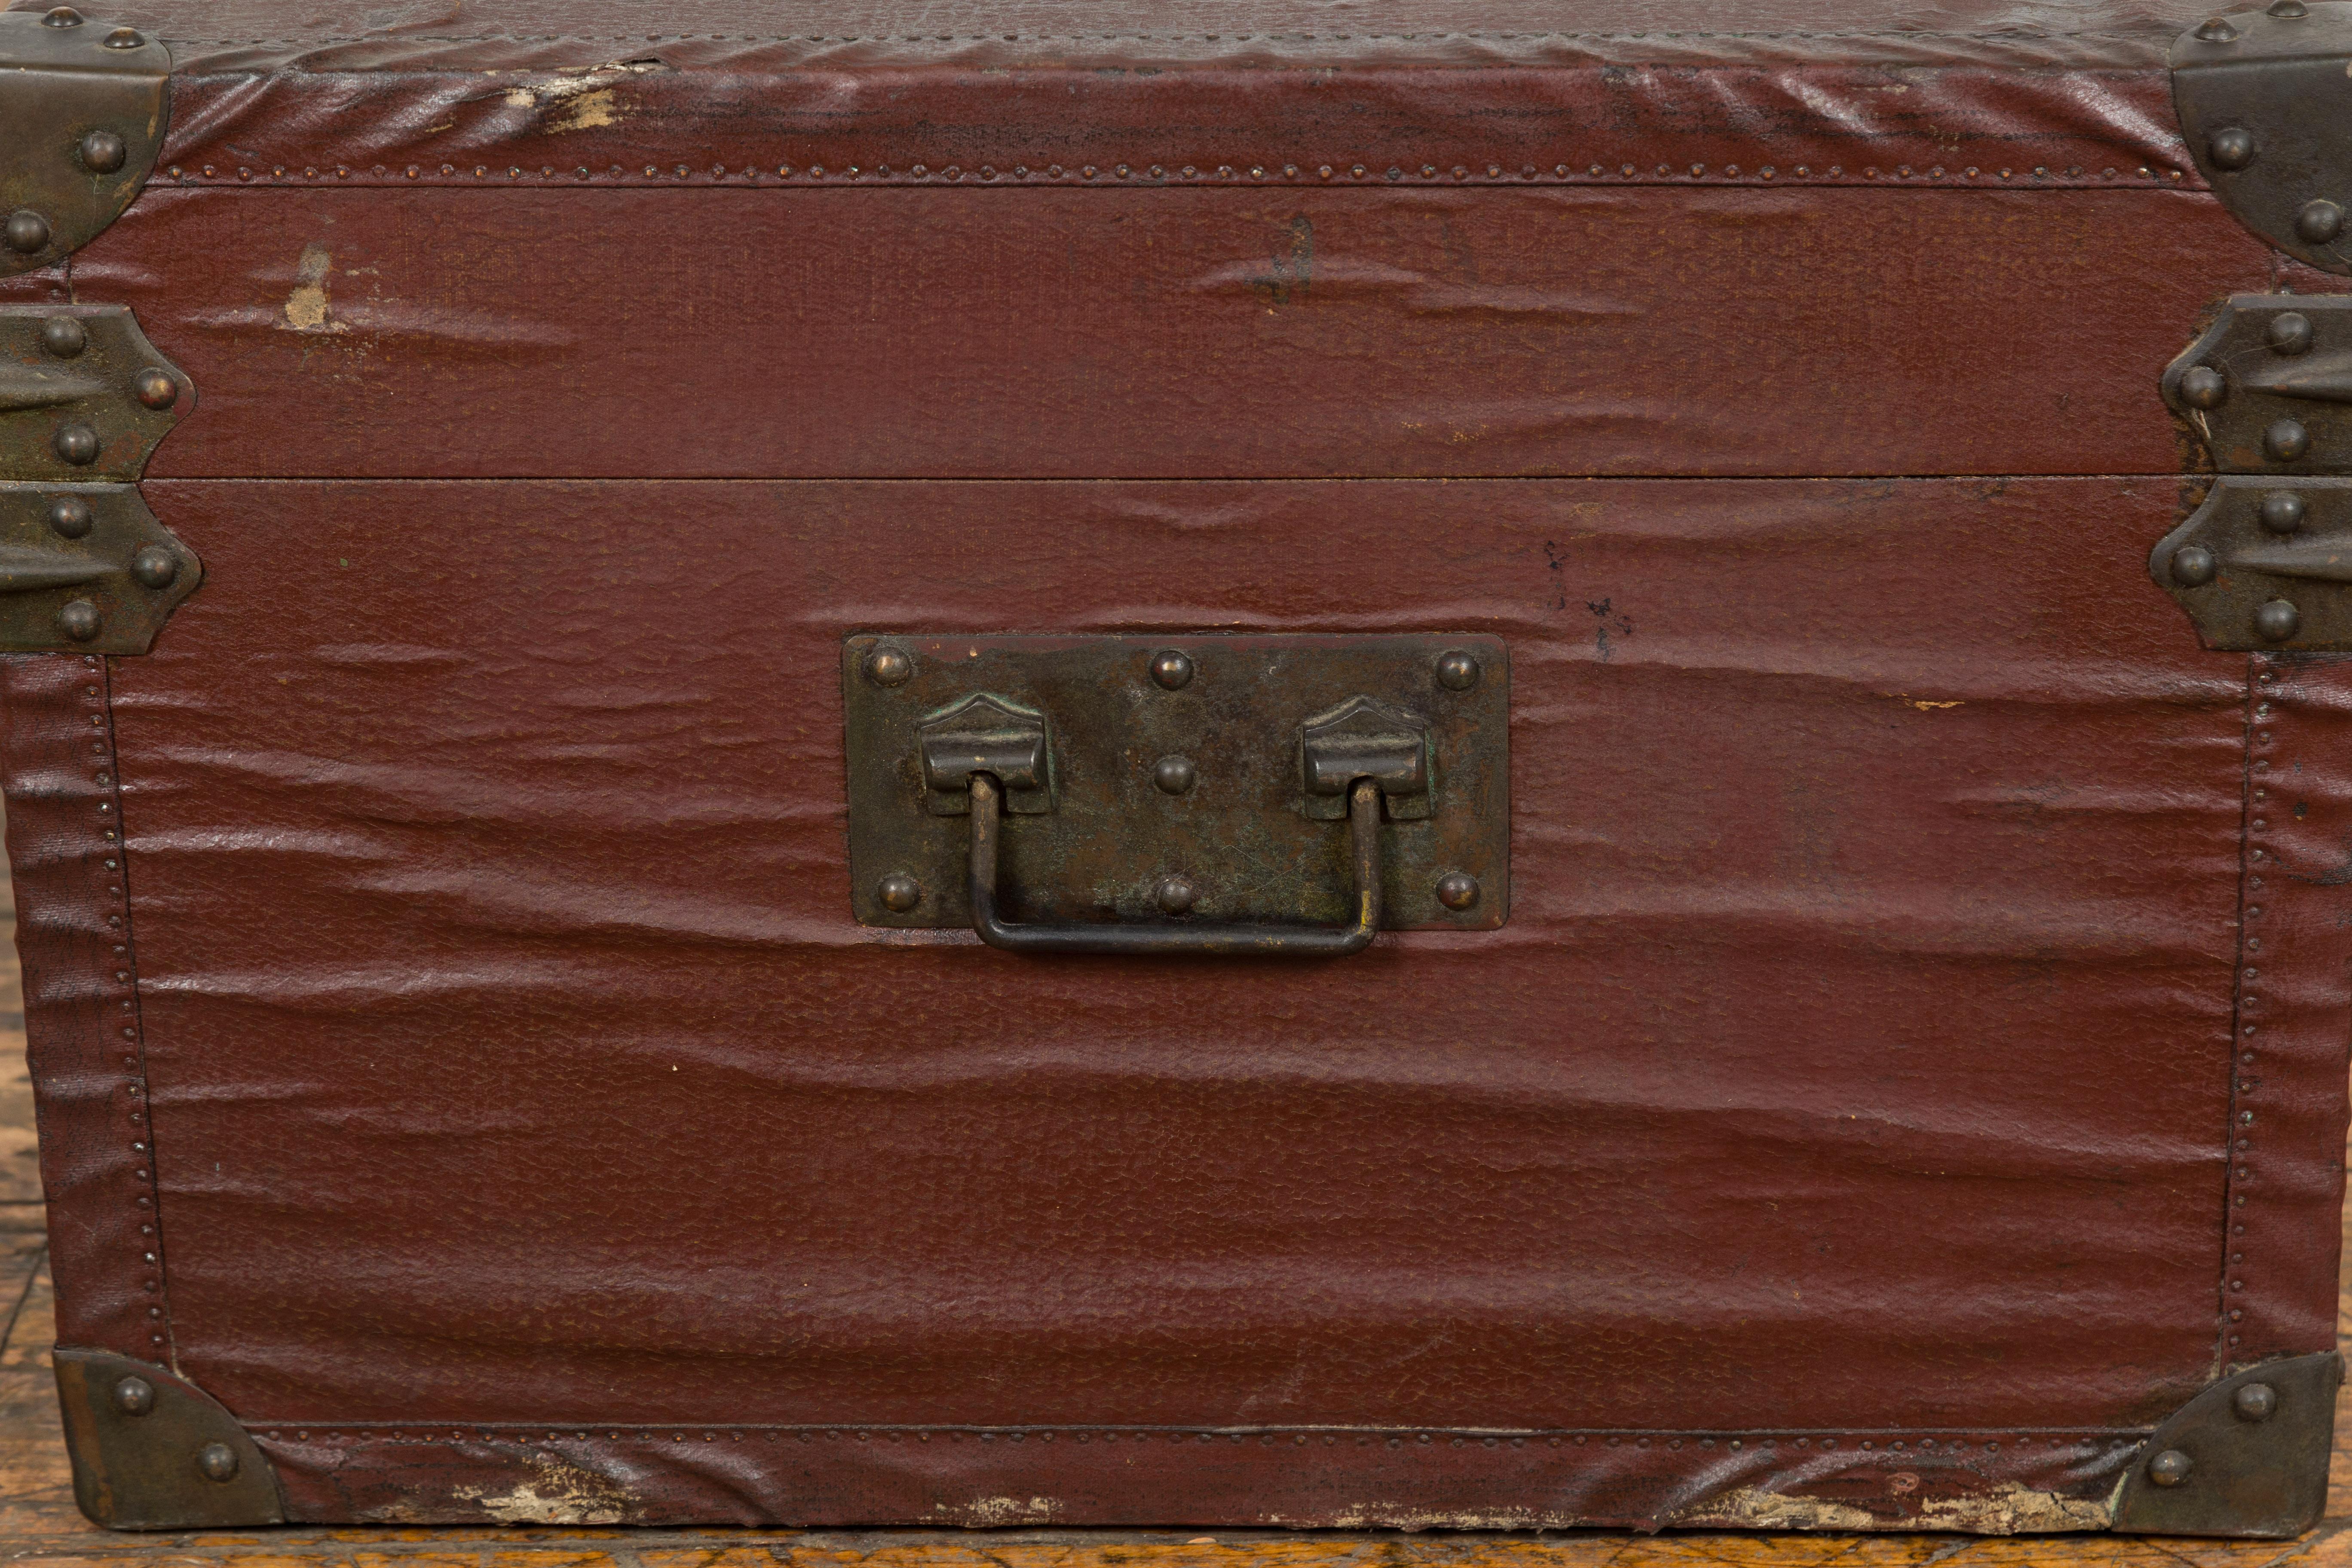 Chinese Qing Dynasty Period 19th Century Brown Leather Trunk with Brass Hardware For Sale 2